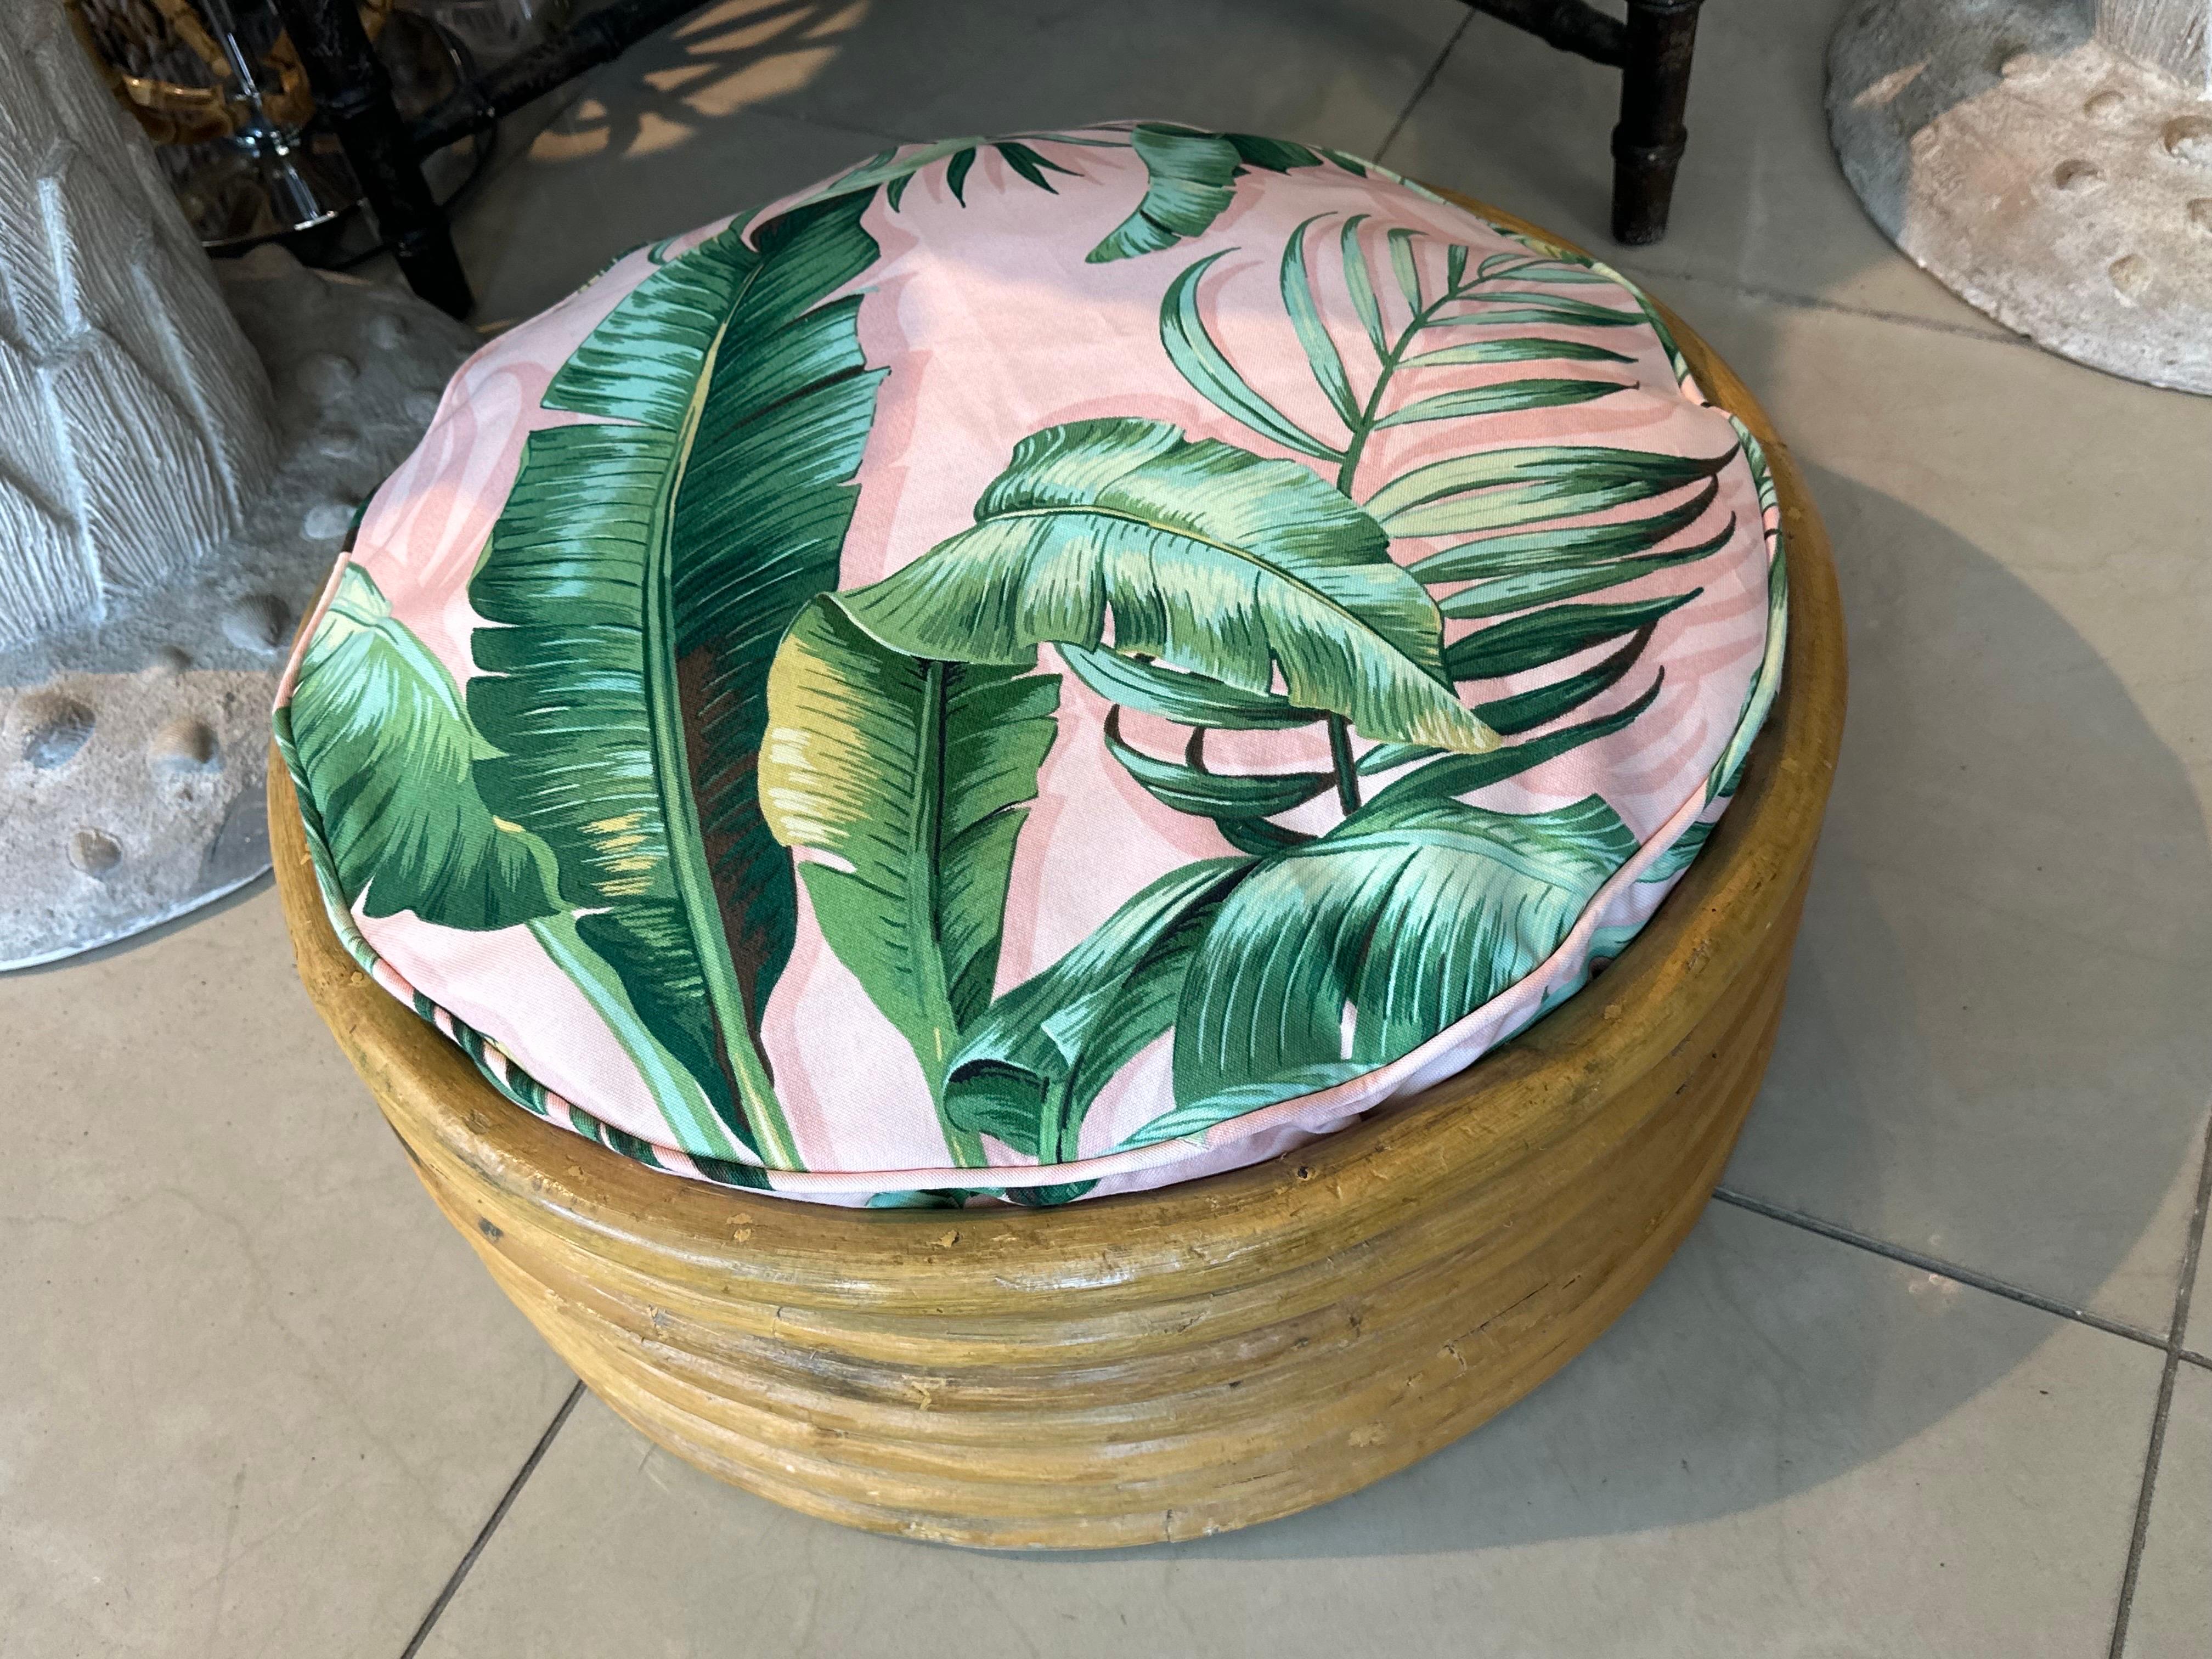 Beautiful vintage round rattan dog bed. Cushion has been custom made and is removable, washable with zippered cover for easy washing. Upholstery is outdoor fabric for durability. Dimensions: 9 H x 21 D. 